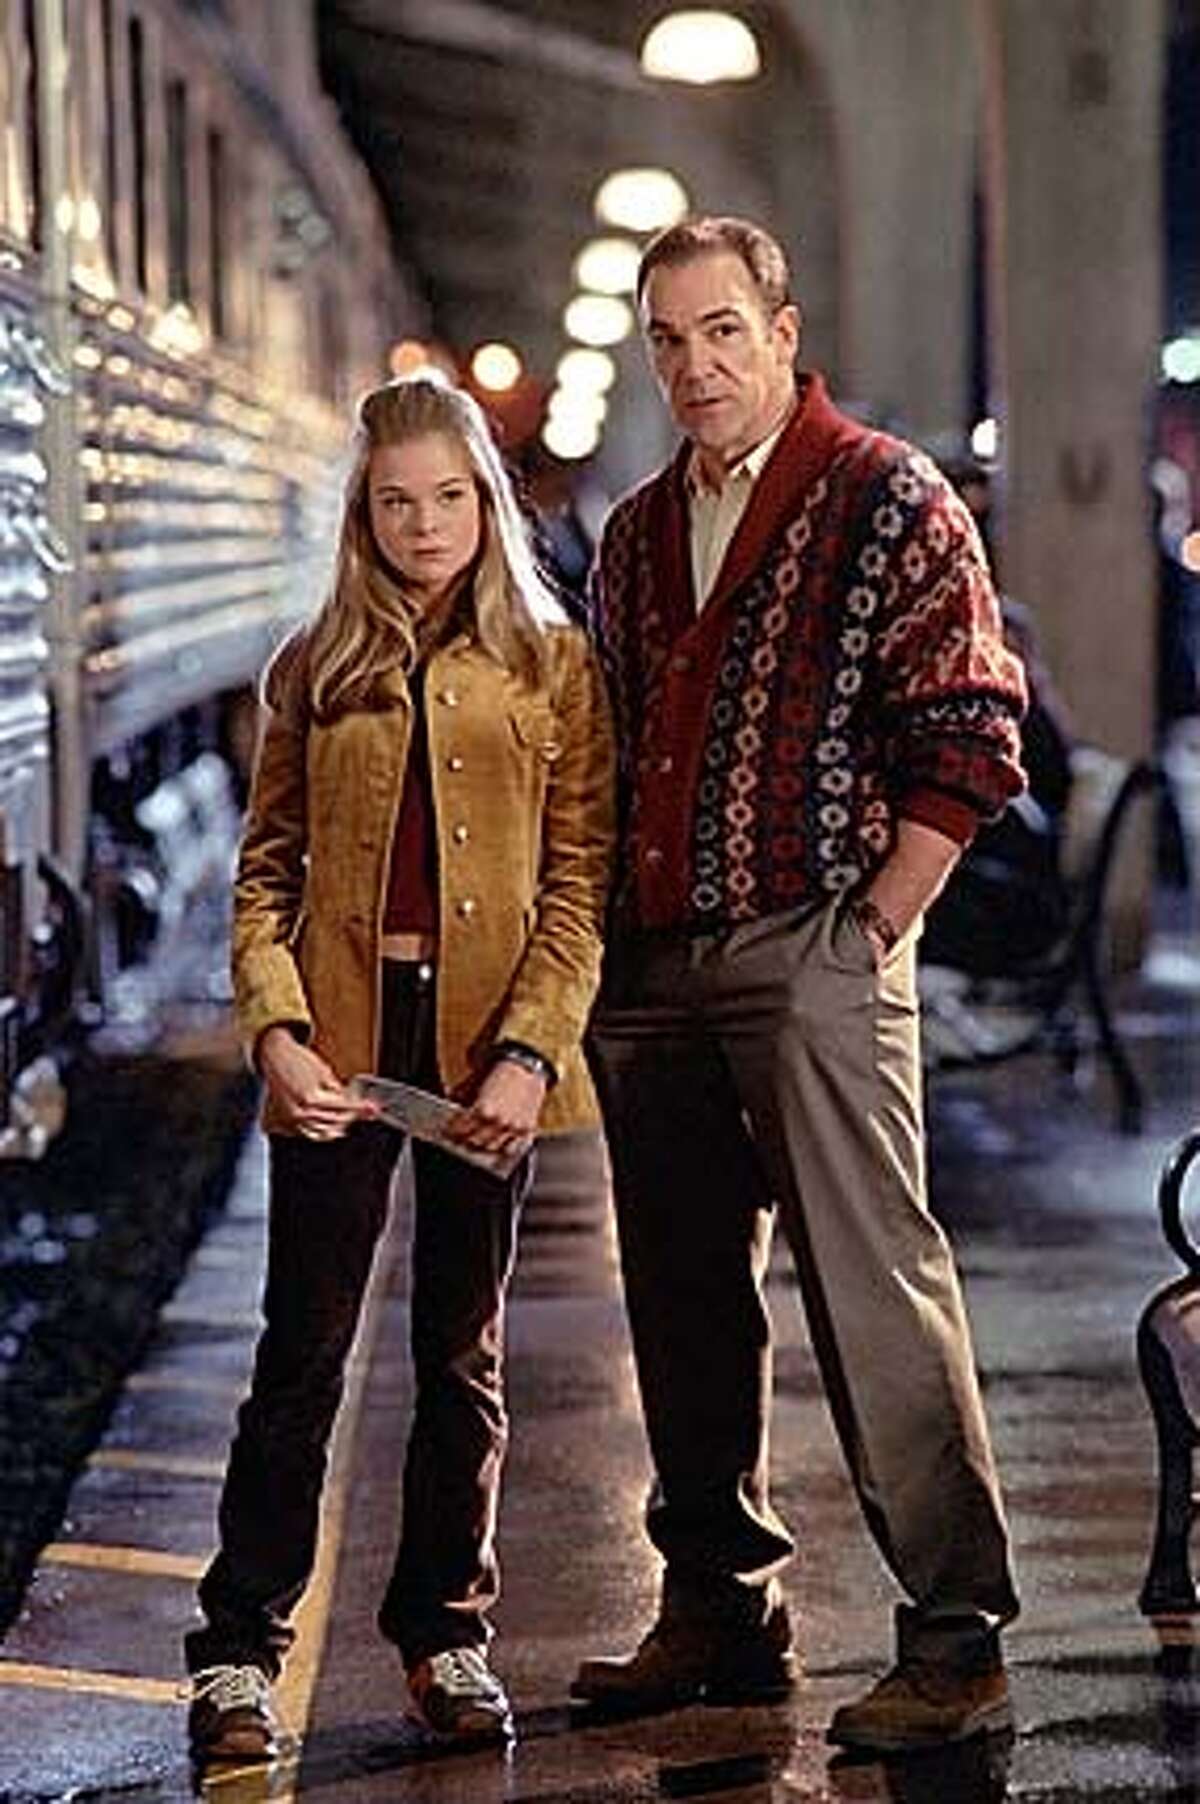 DEAD LIKE ME 08 e For PINKCOVER08, Datebook; Ellen Muth as George Lass and Mandy Patinkin as Rube in "Dead Like Me." Photo: Carole Segal/Showtime; date} in . Carole Segal / Showtime